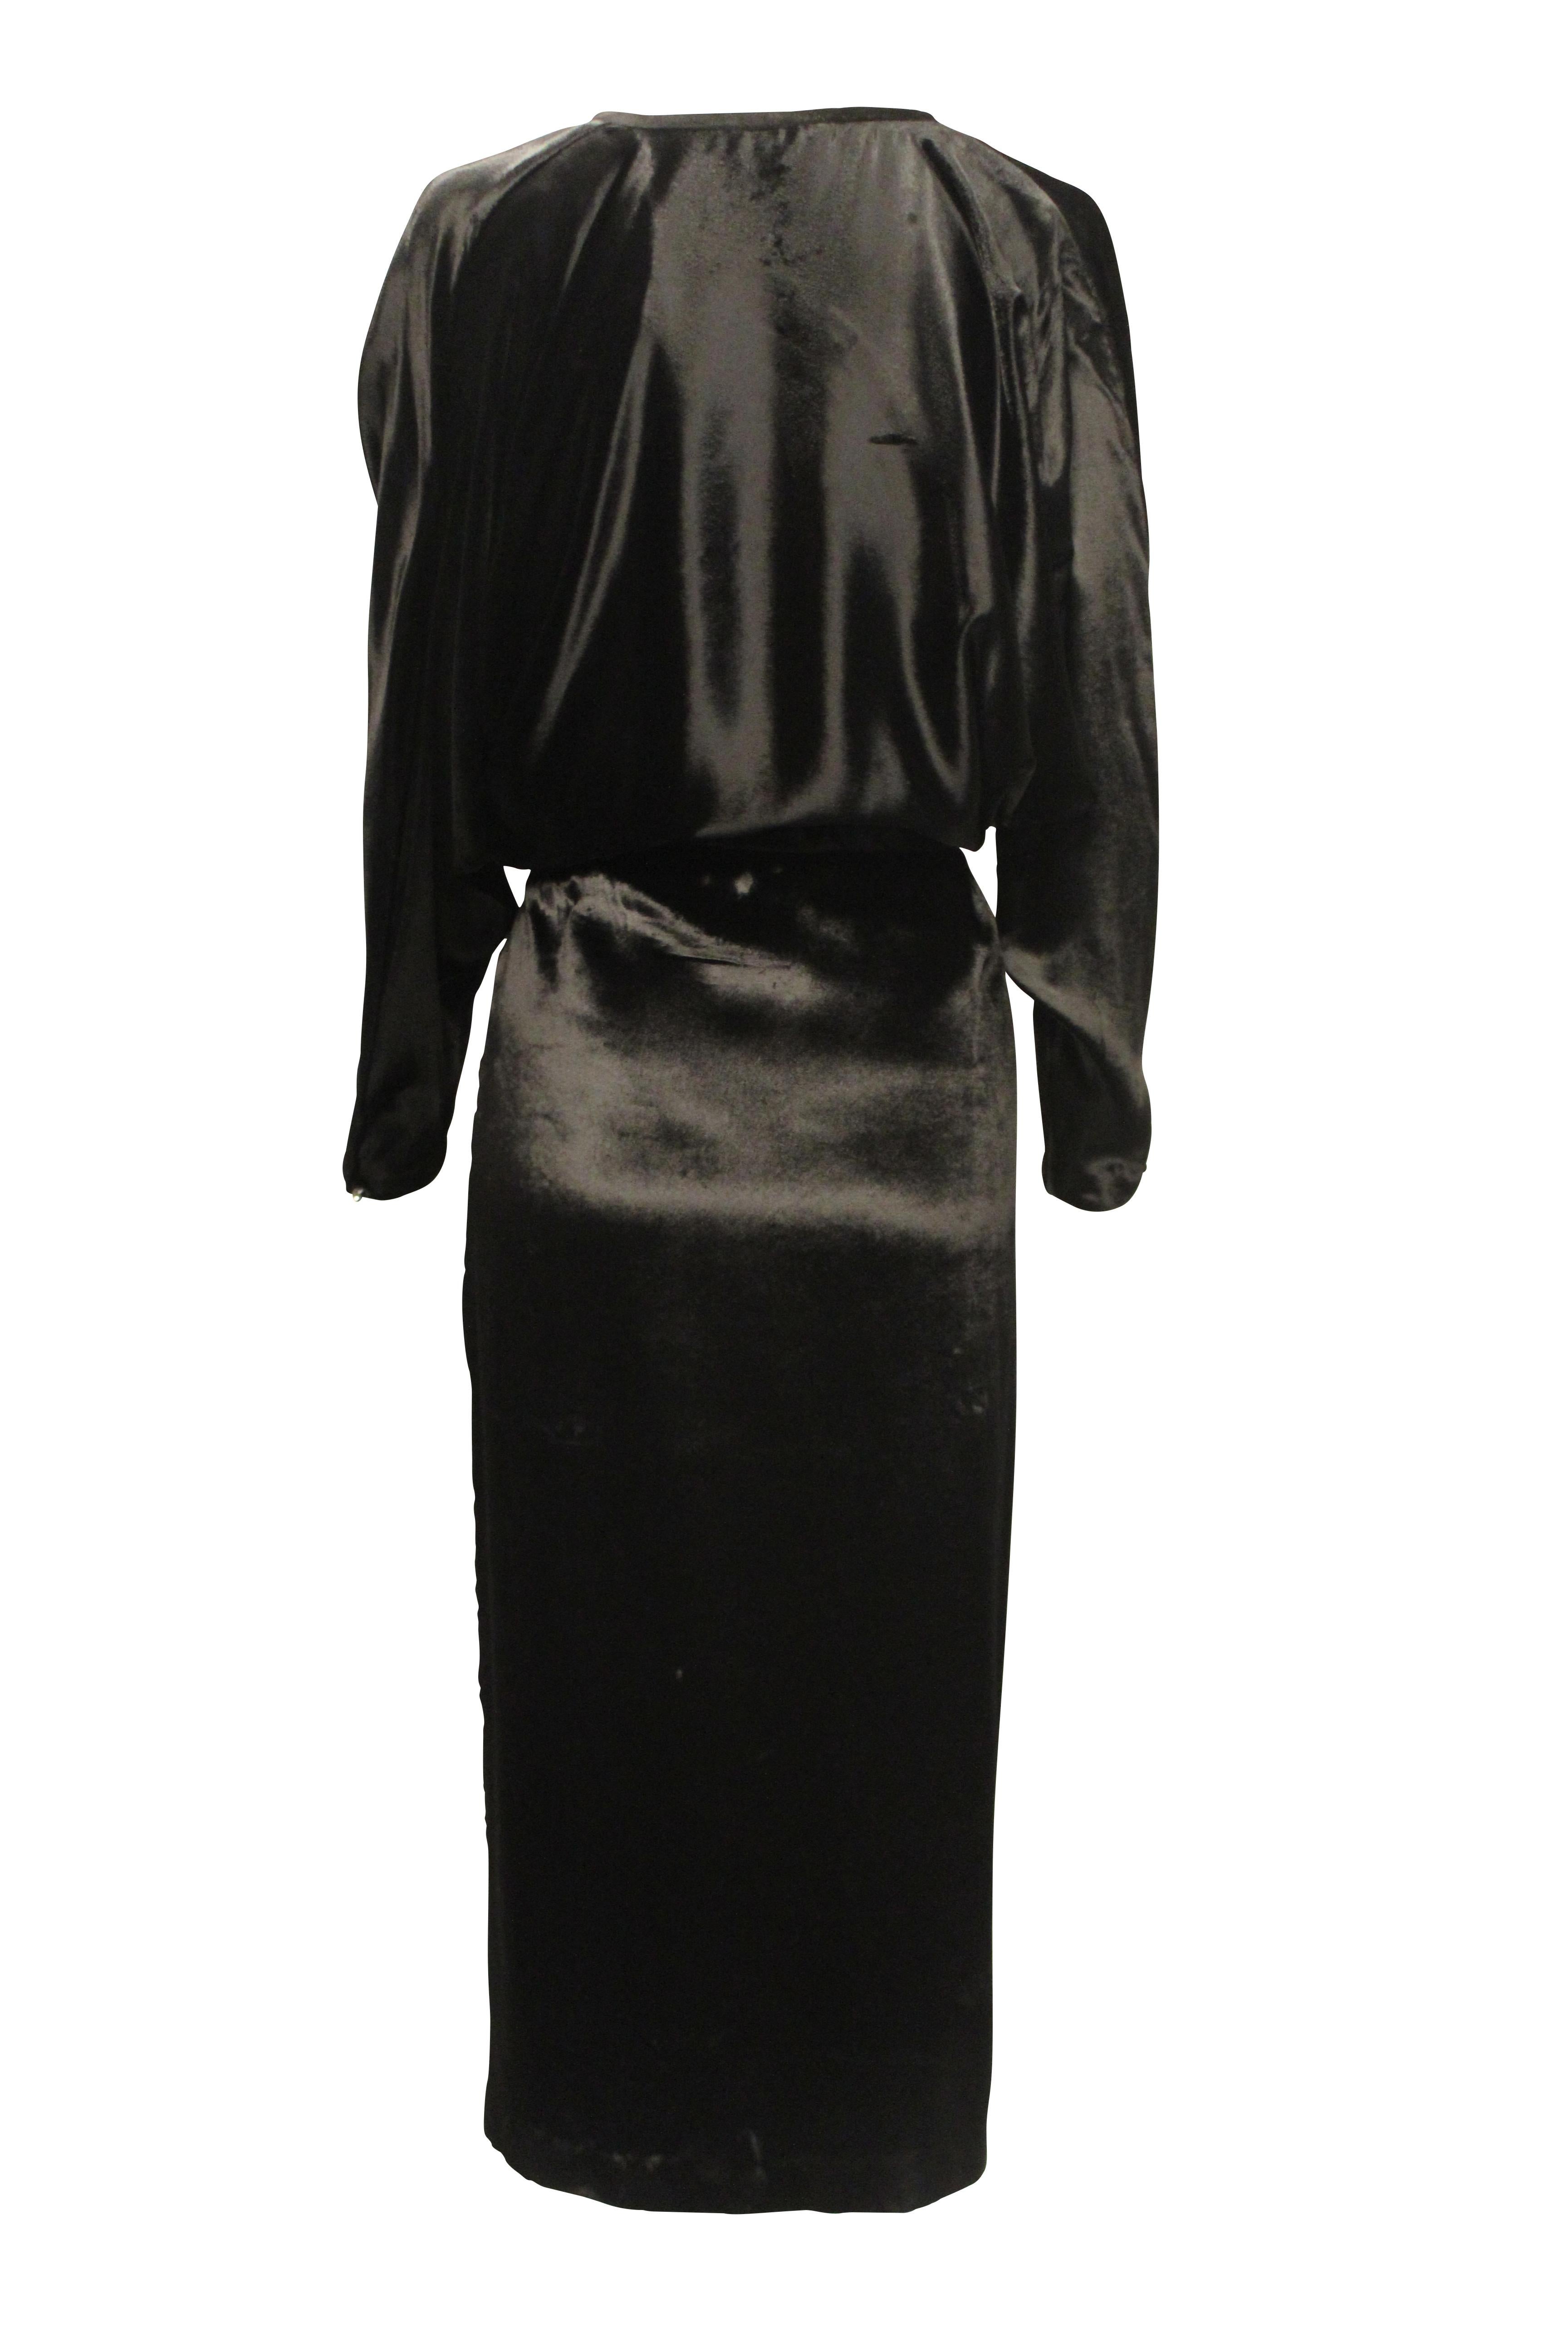 Vintage Pierre Cardin fully lined slinky velvet dress with bat wing sleeves, deep V neckline and 3 tie up velvet strands that can be left undone or tied across the neck line. 